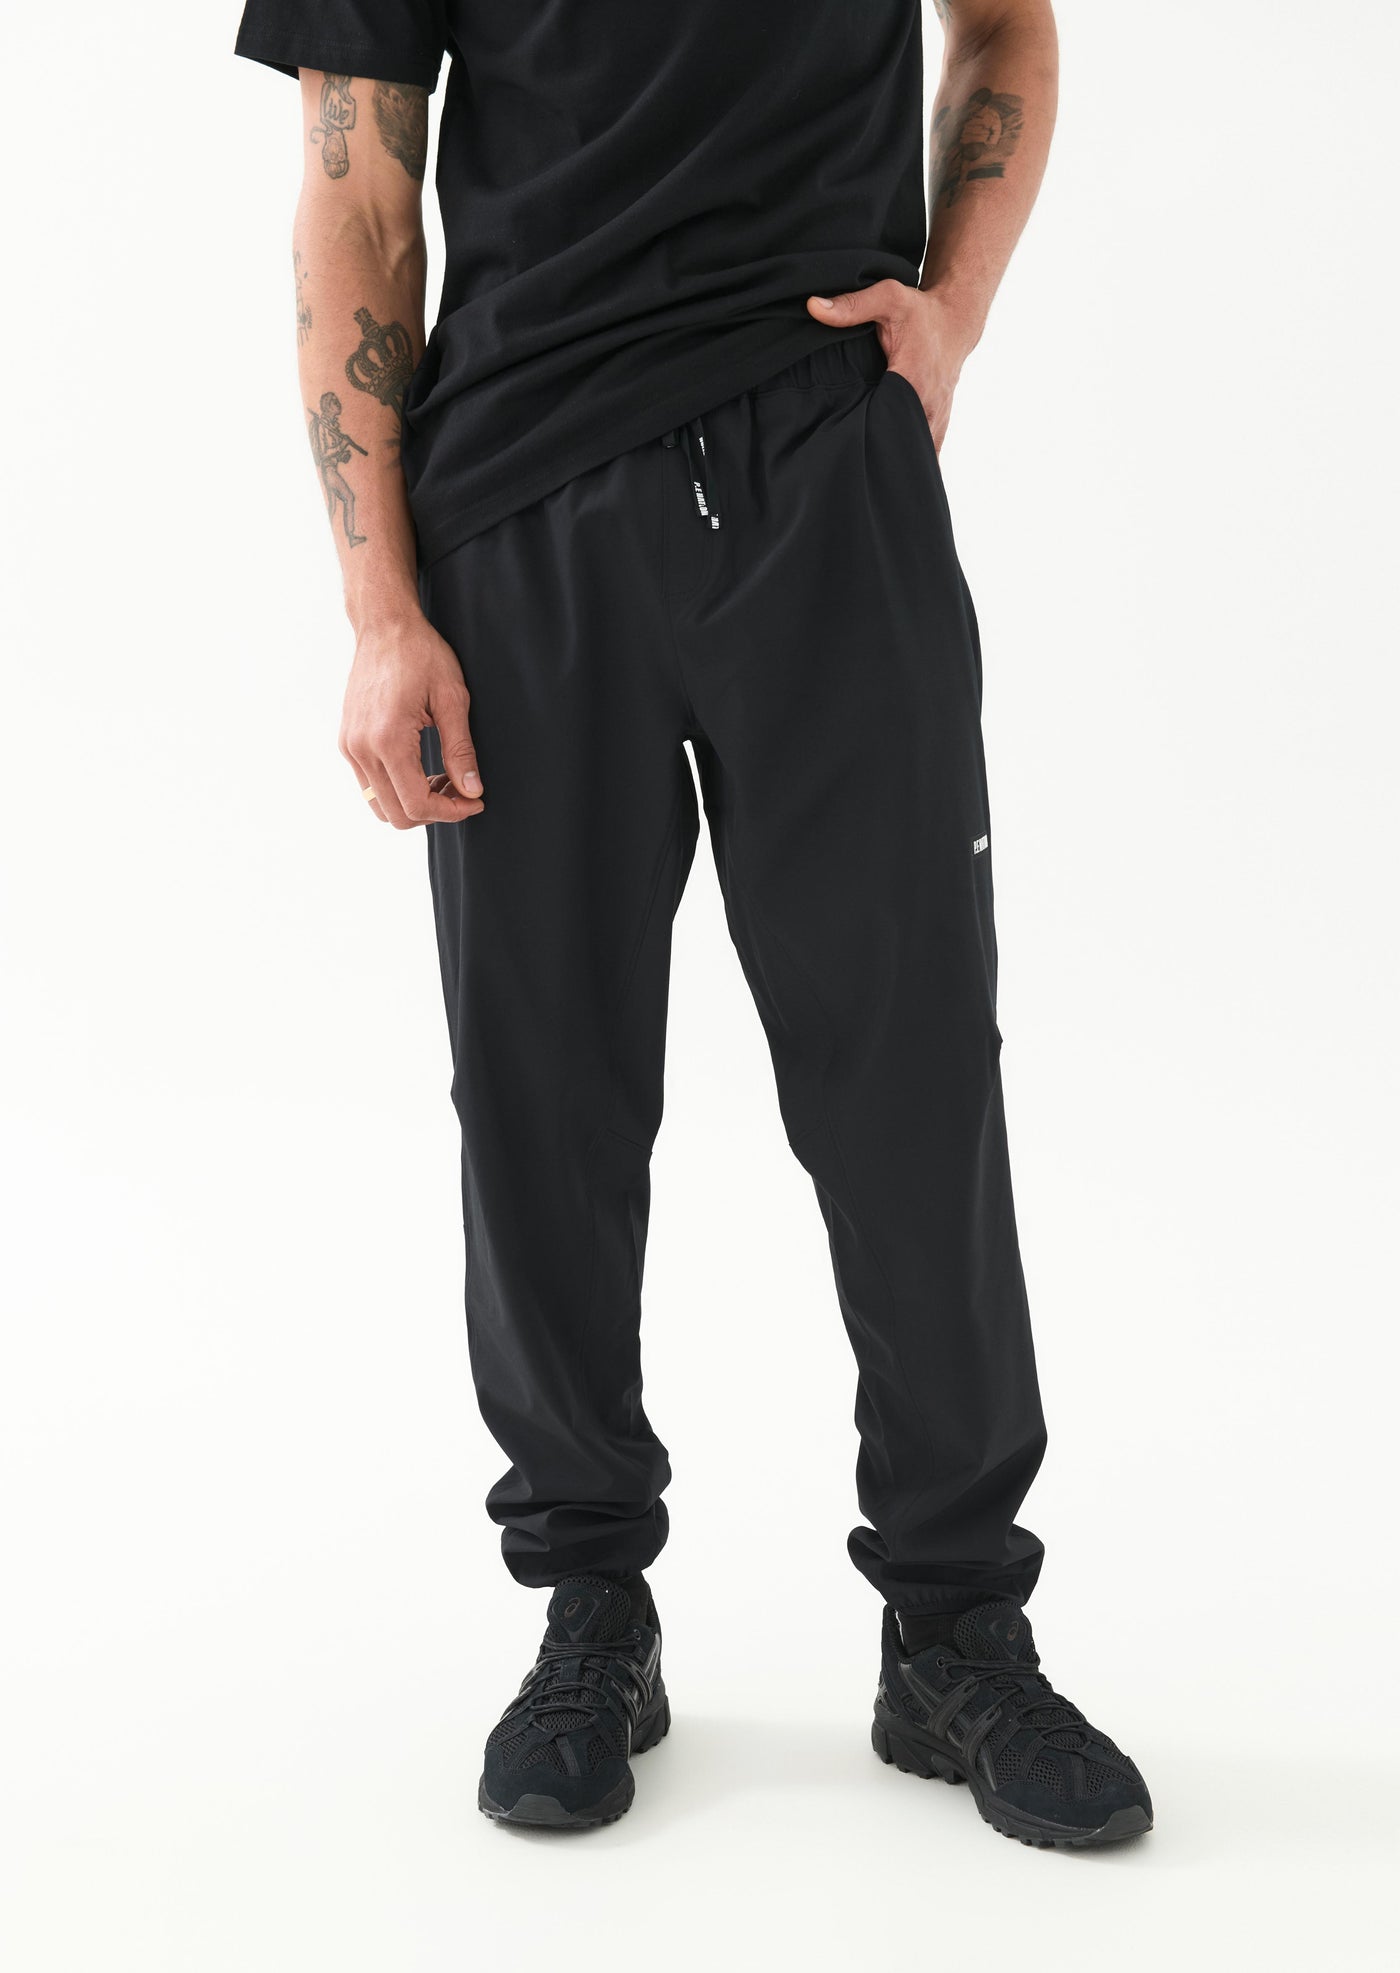 EXPEDITION SPRAY PANT IN BLACK